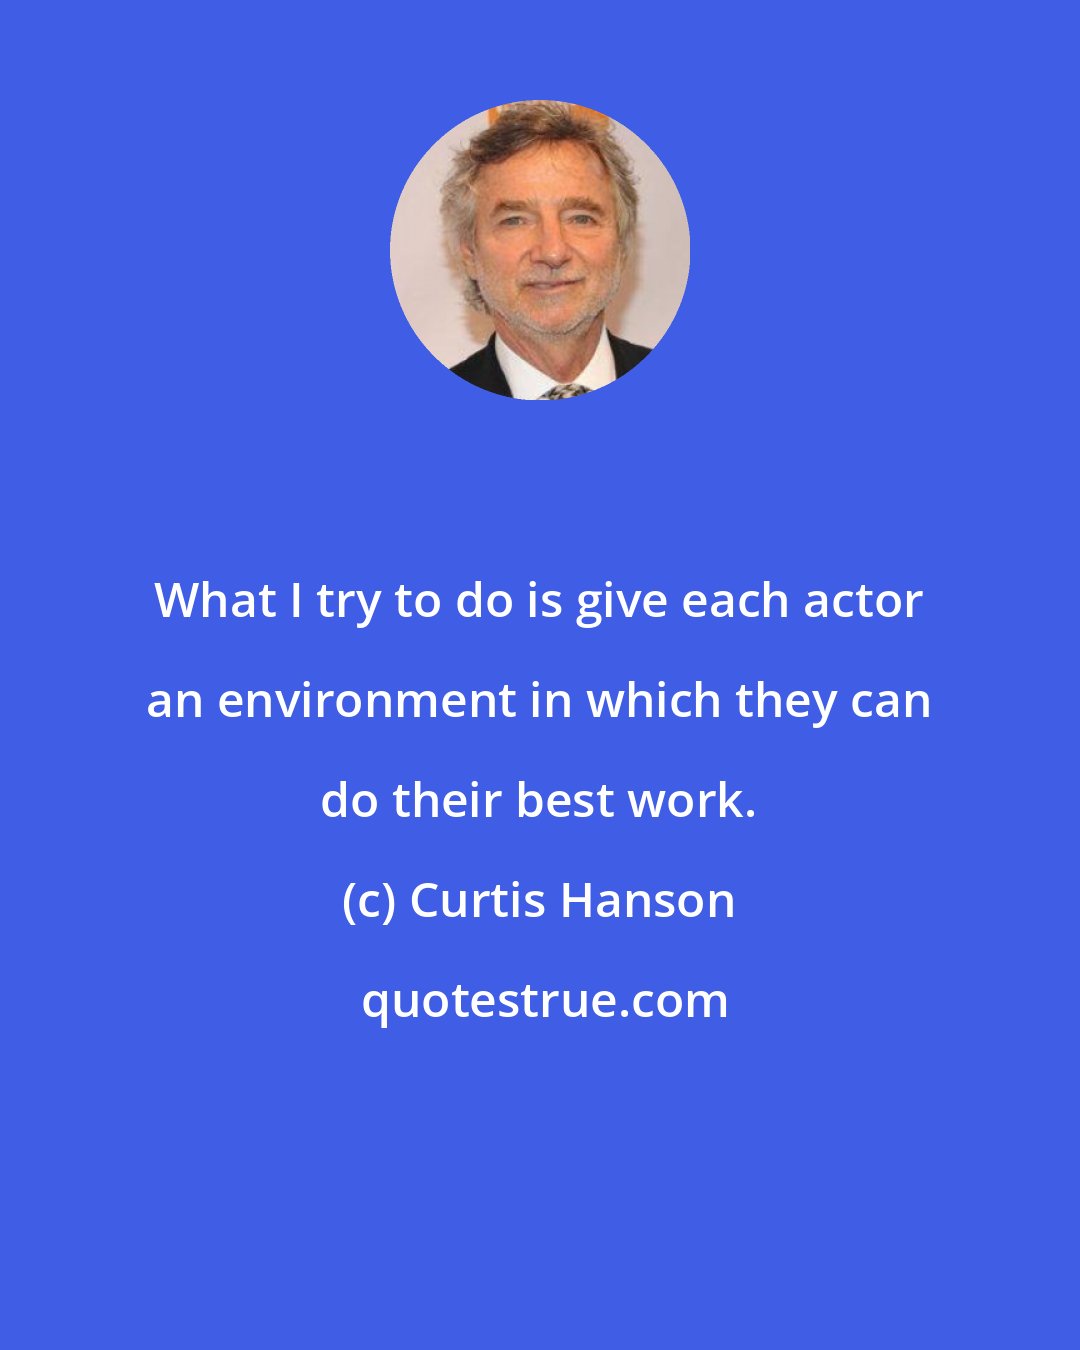 Curtis Hanson: What I try to do is give each actor an environment in which they can do their best work.